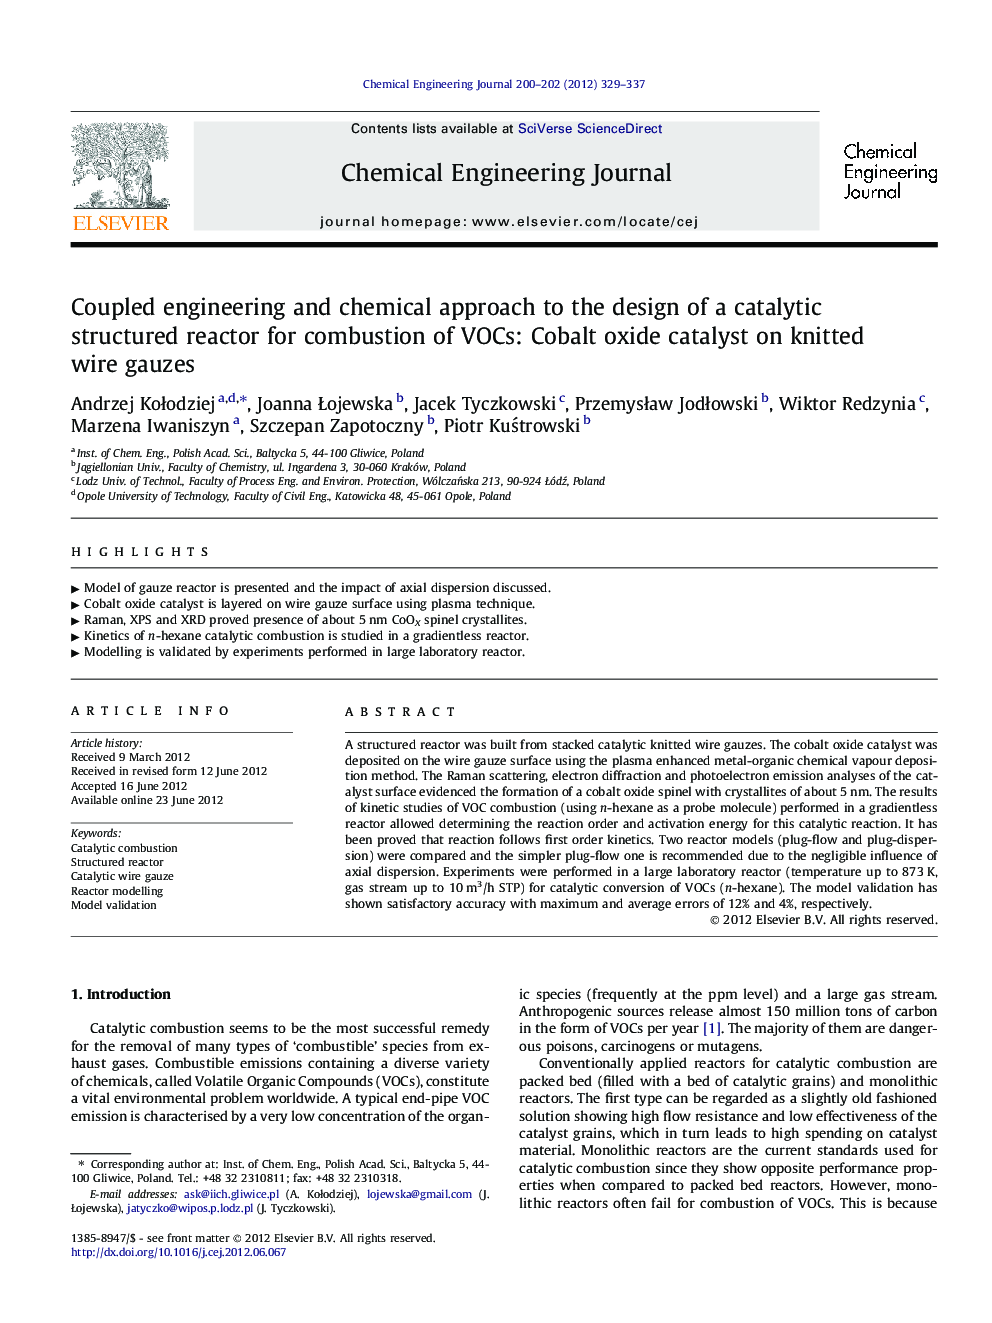 Coupled engineering and chemical approach to the design of a catalytic structured reactor for combustion of VOCs: Cobalt oxide catalyst on knitted wire gauzes